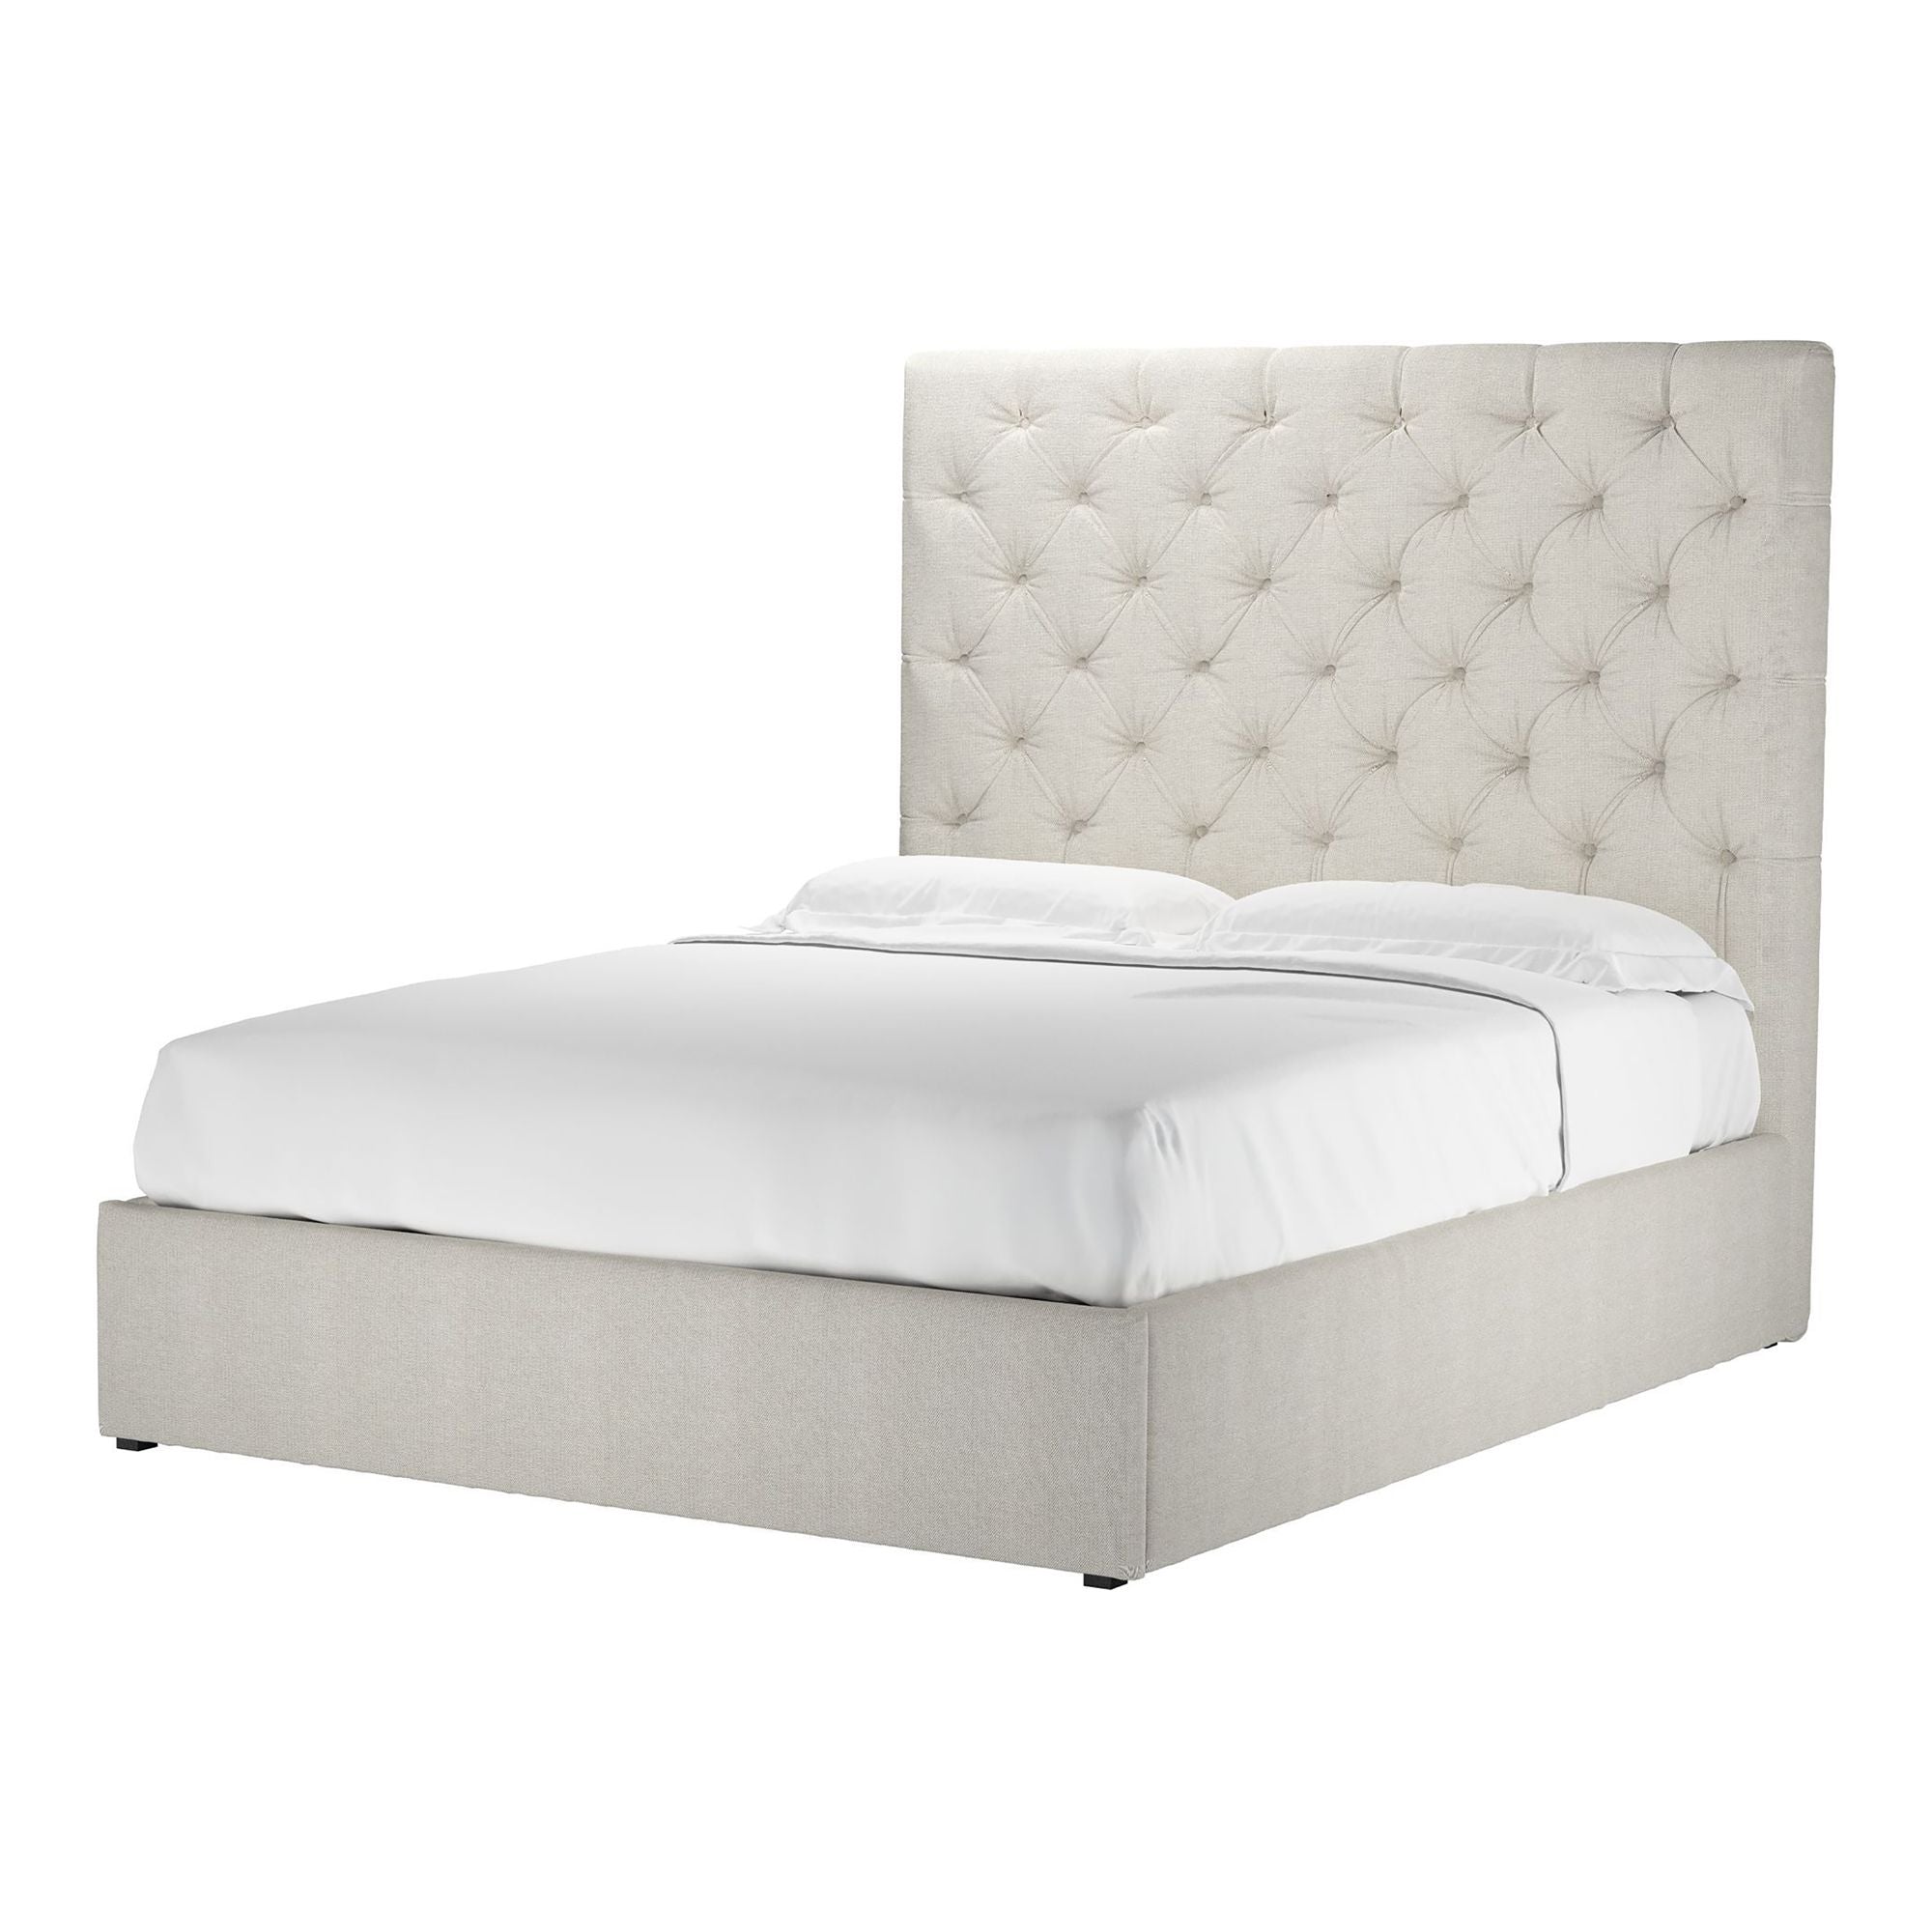 Rosalie Clay House Basket Weave Ottoman Bed - King Size